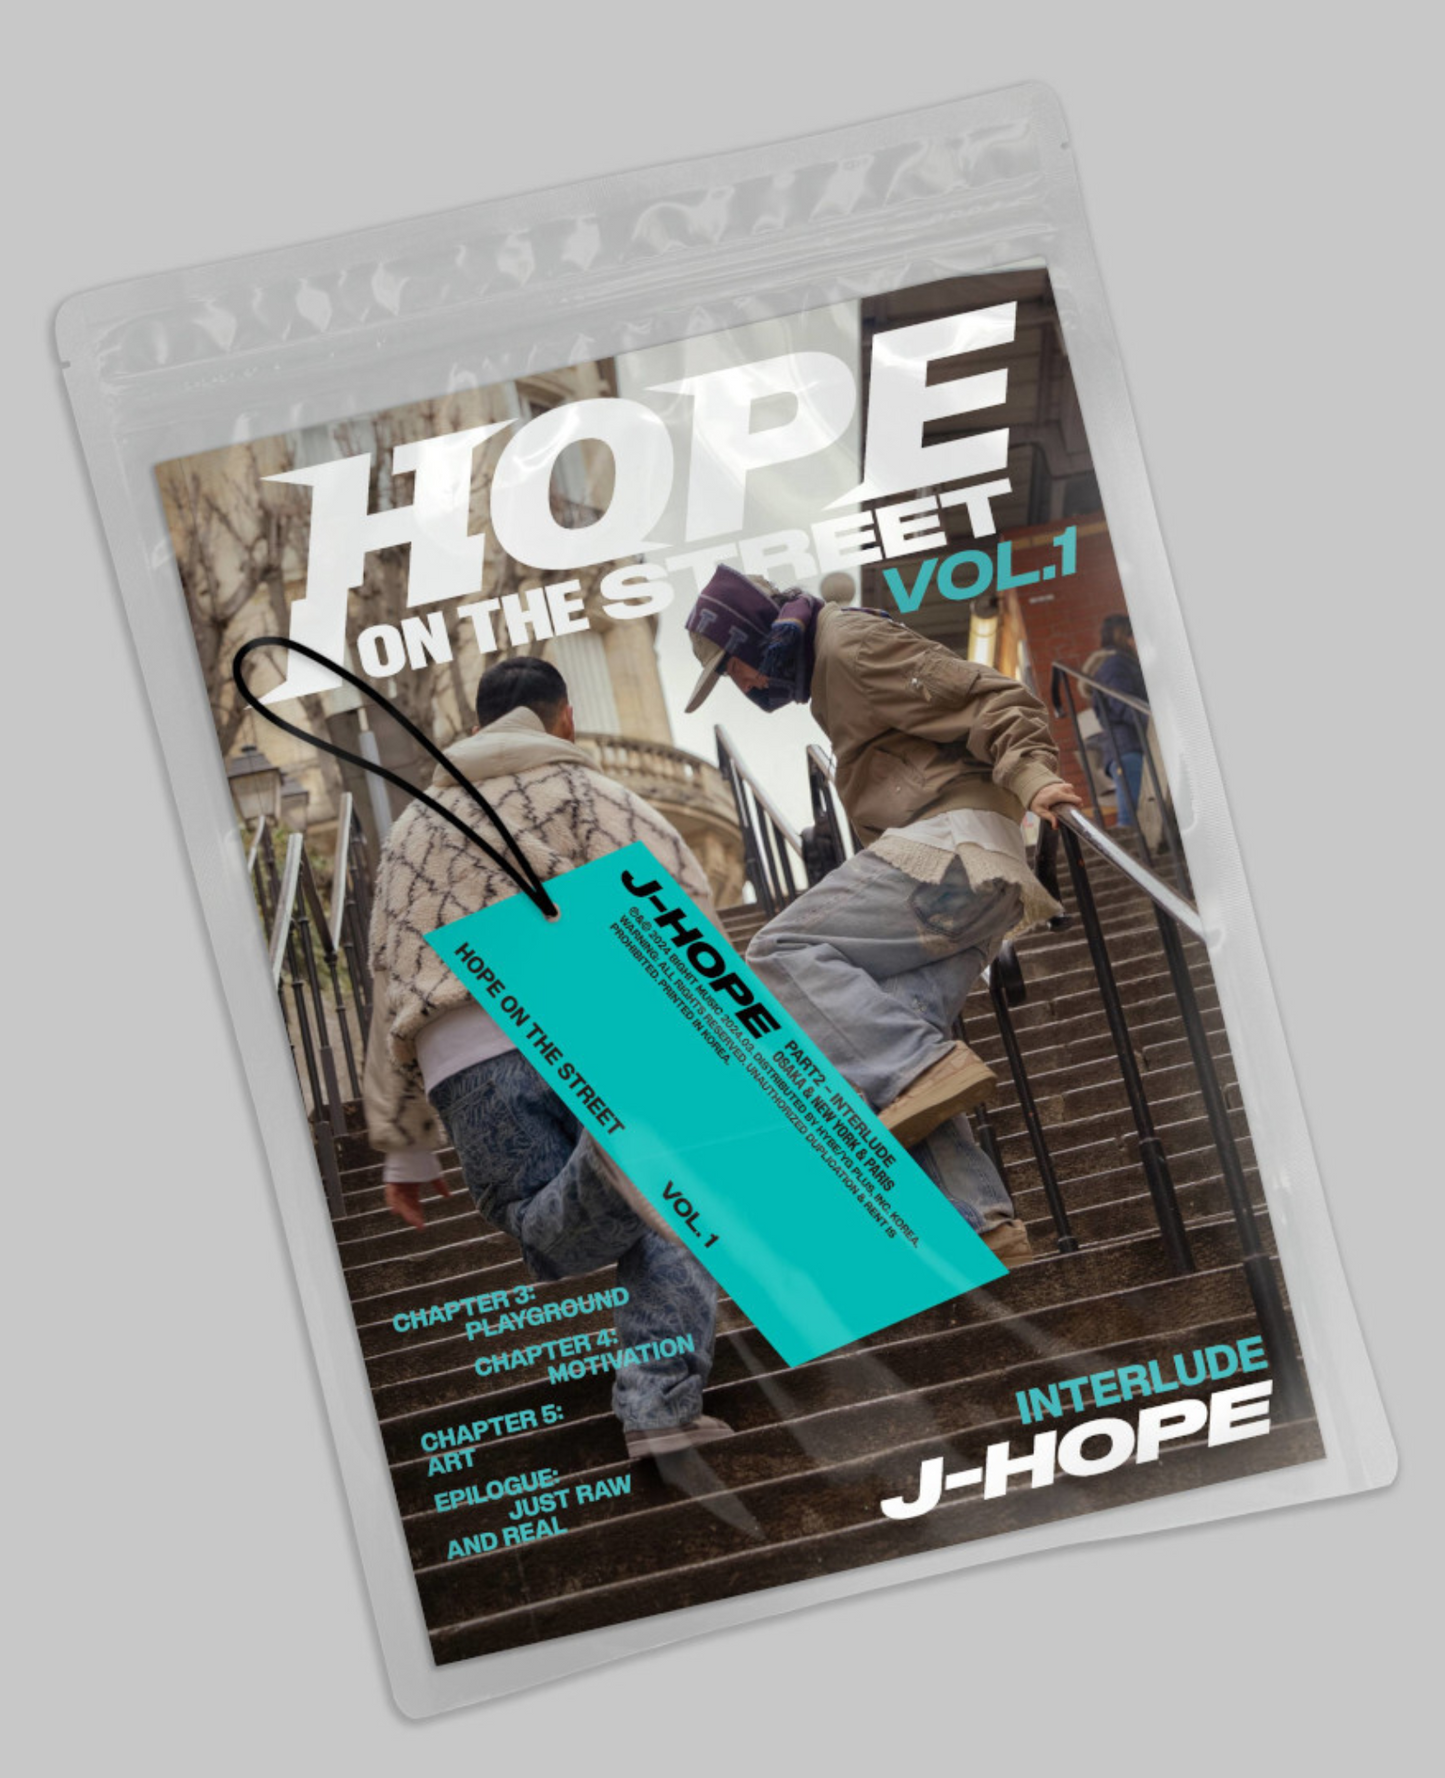 16416-J-hope hope on the street interlude .png